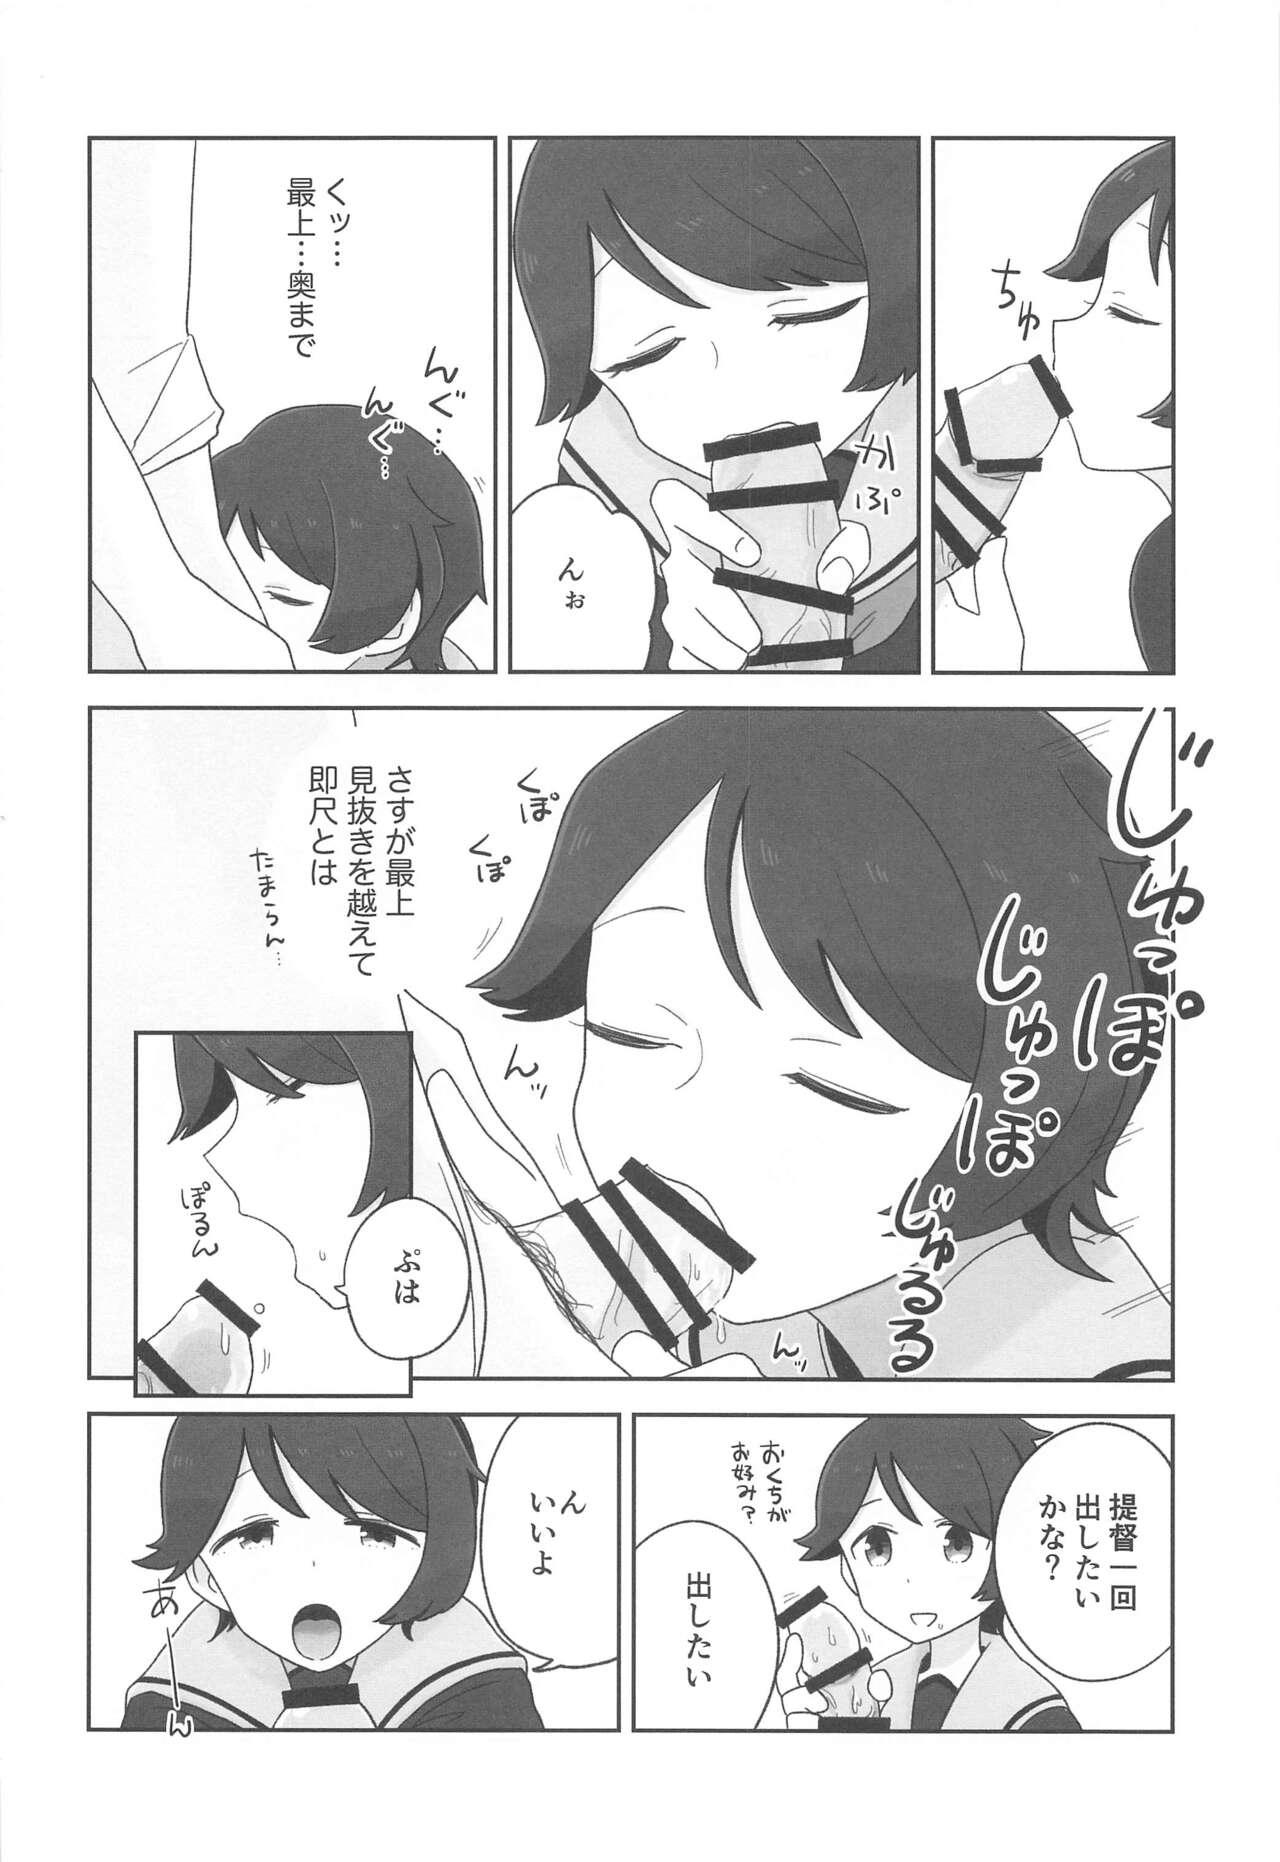 Sucking Mogamix - Make love with Mogami. - Kantai collection Gay Rimming - Page 3